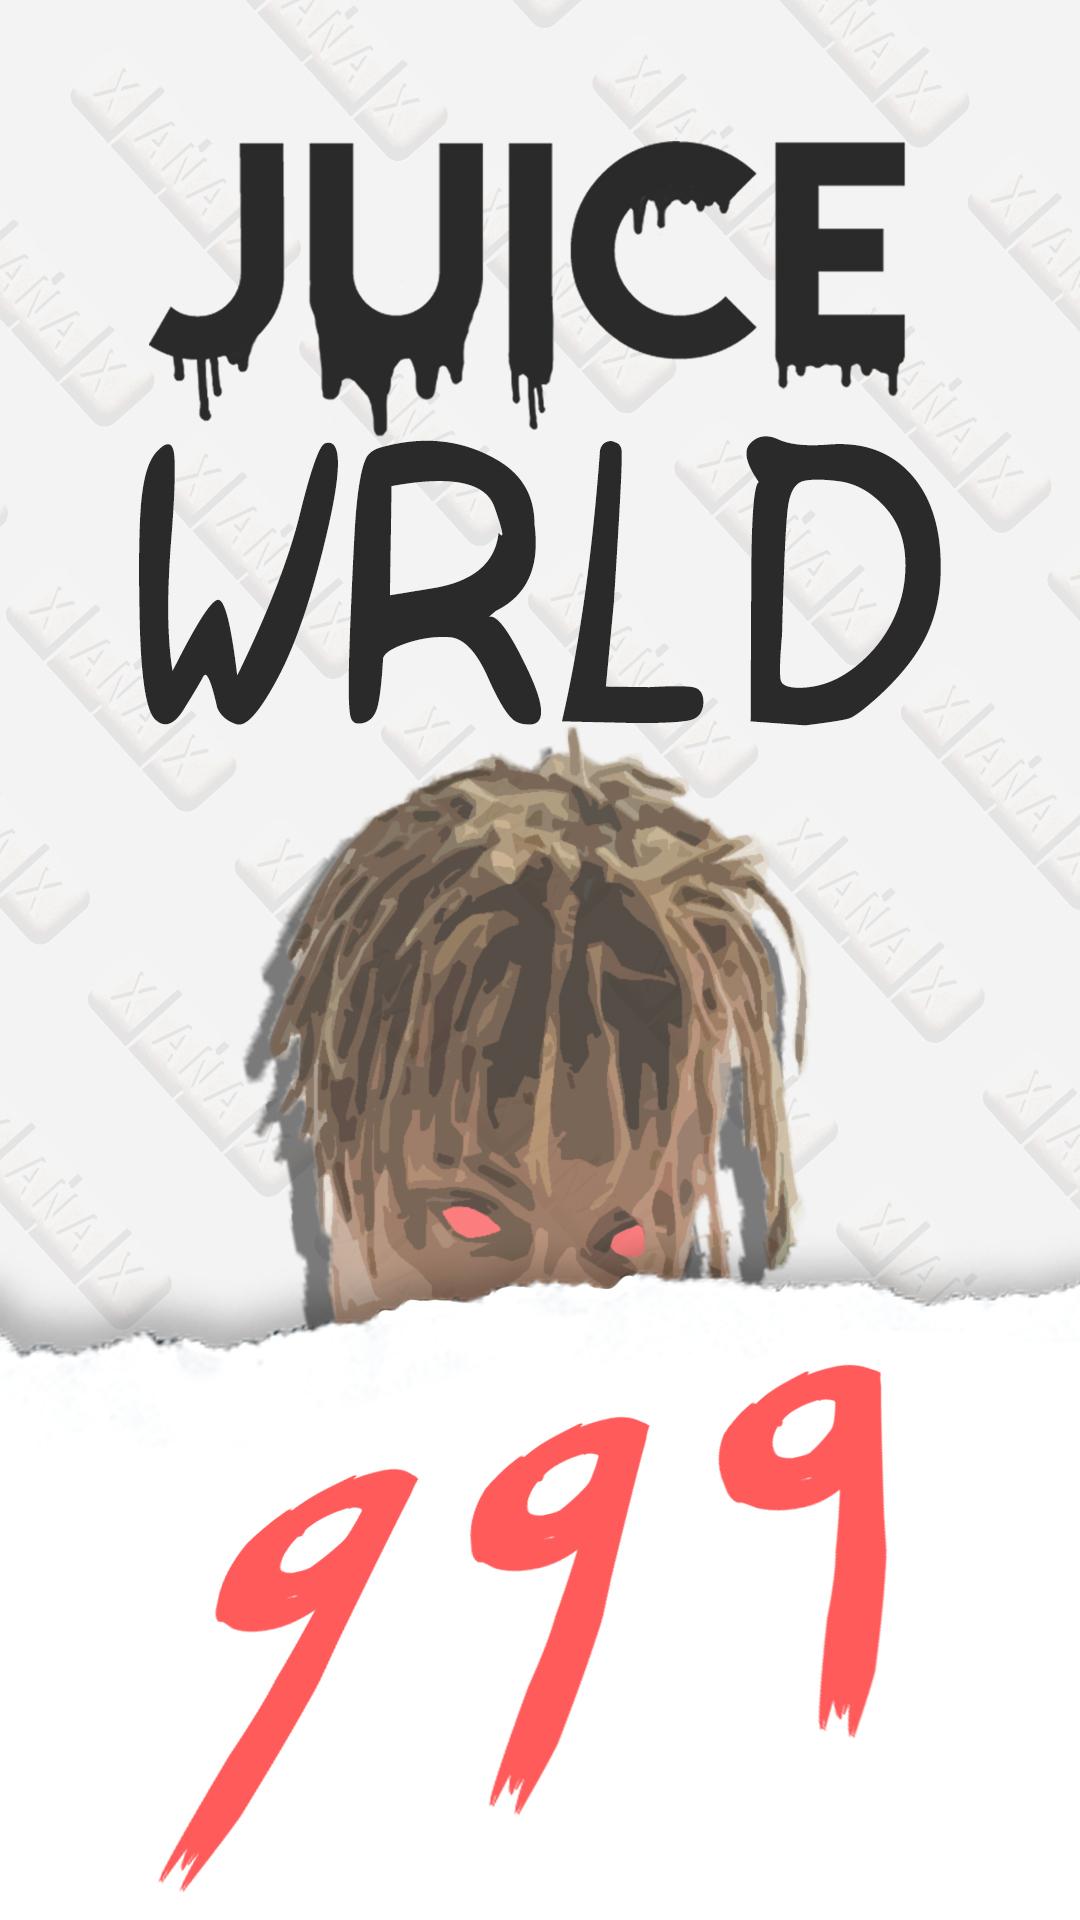 Juice wrld 999 wallpaper by rithiksan  Download on ZEDGE  2c4d